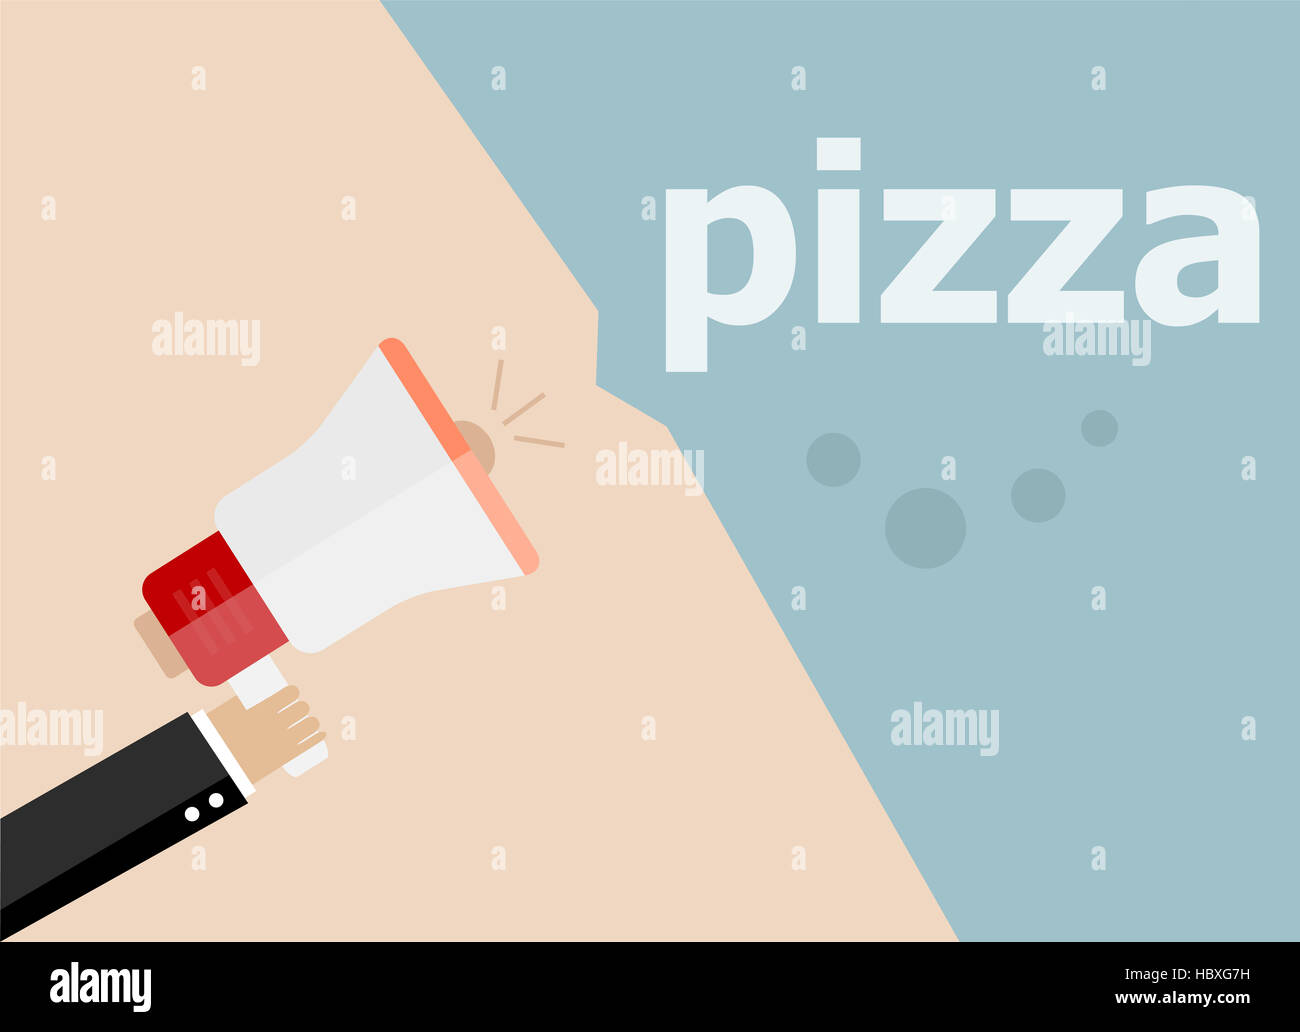 Pizza. Hand holding a megaphone. flat style Stock Photo